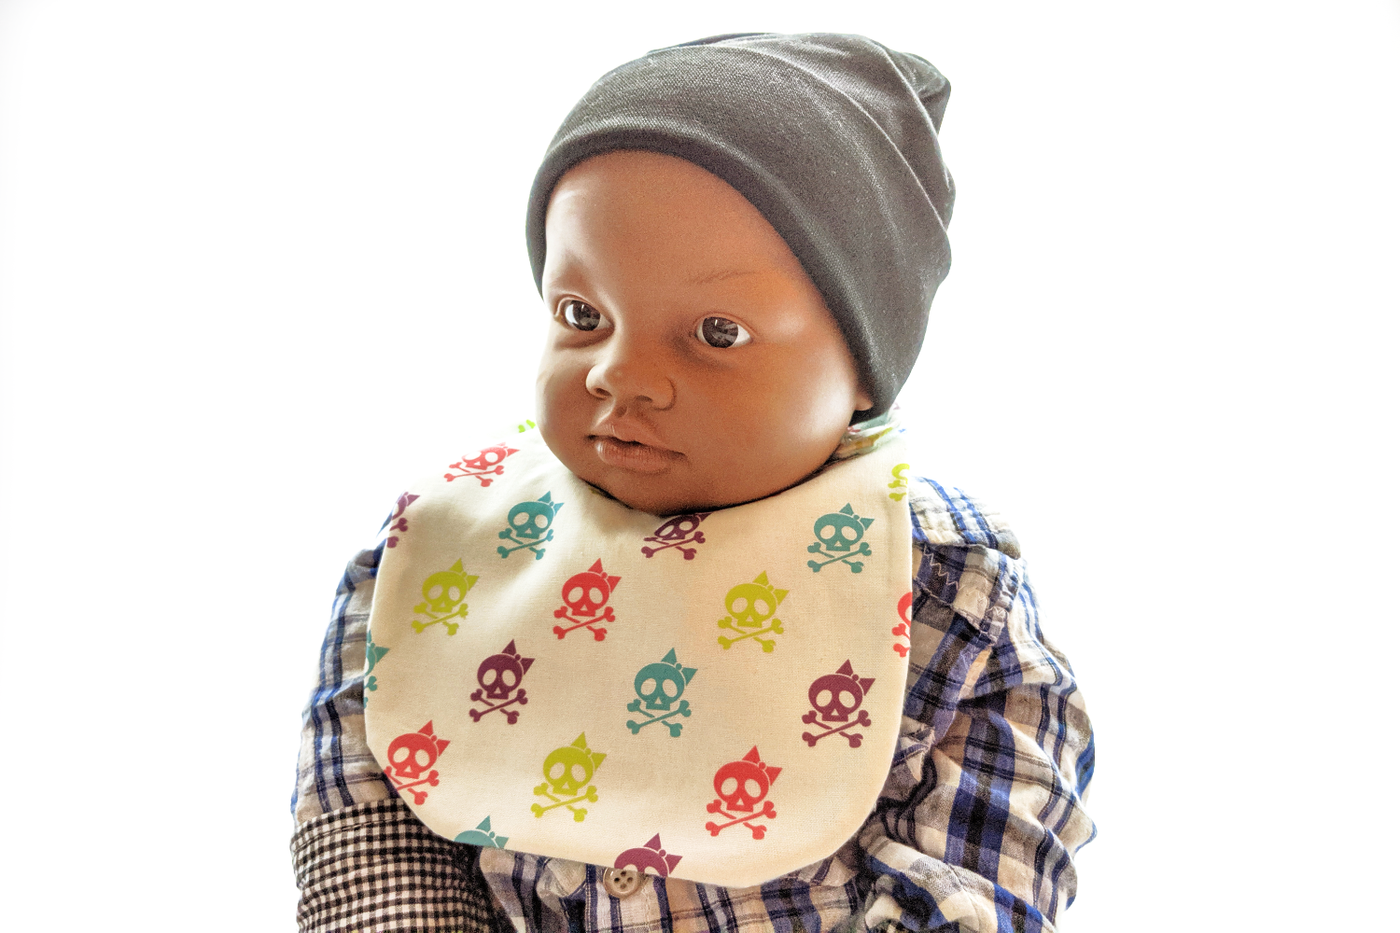 A black baby mannequin wears a bib, plaid shirt, and grey beanie. The bib fabric is off-white with a pattern of cute skulls with bows in lime green, turquoise, hot pink, and purple.